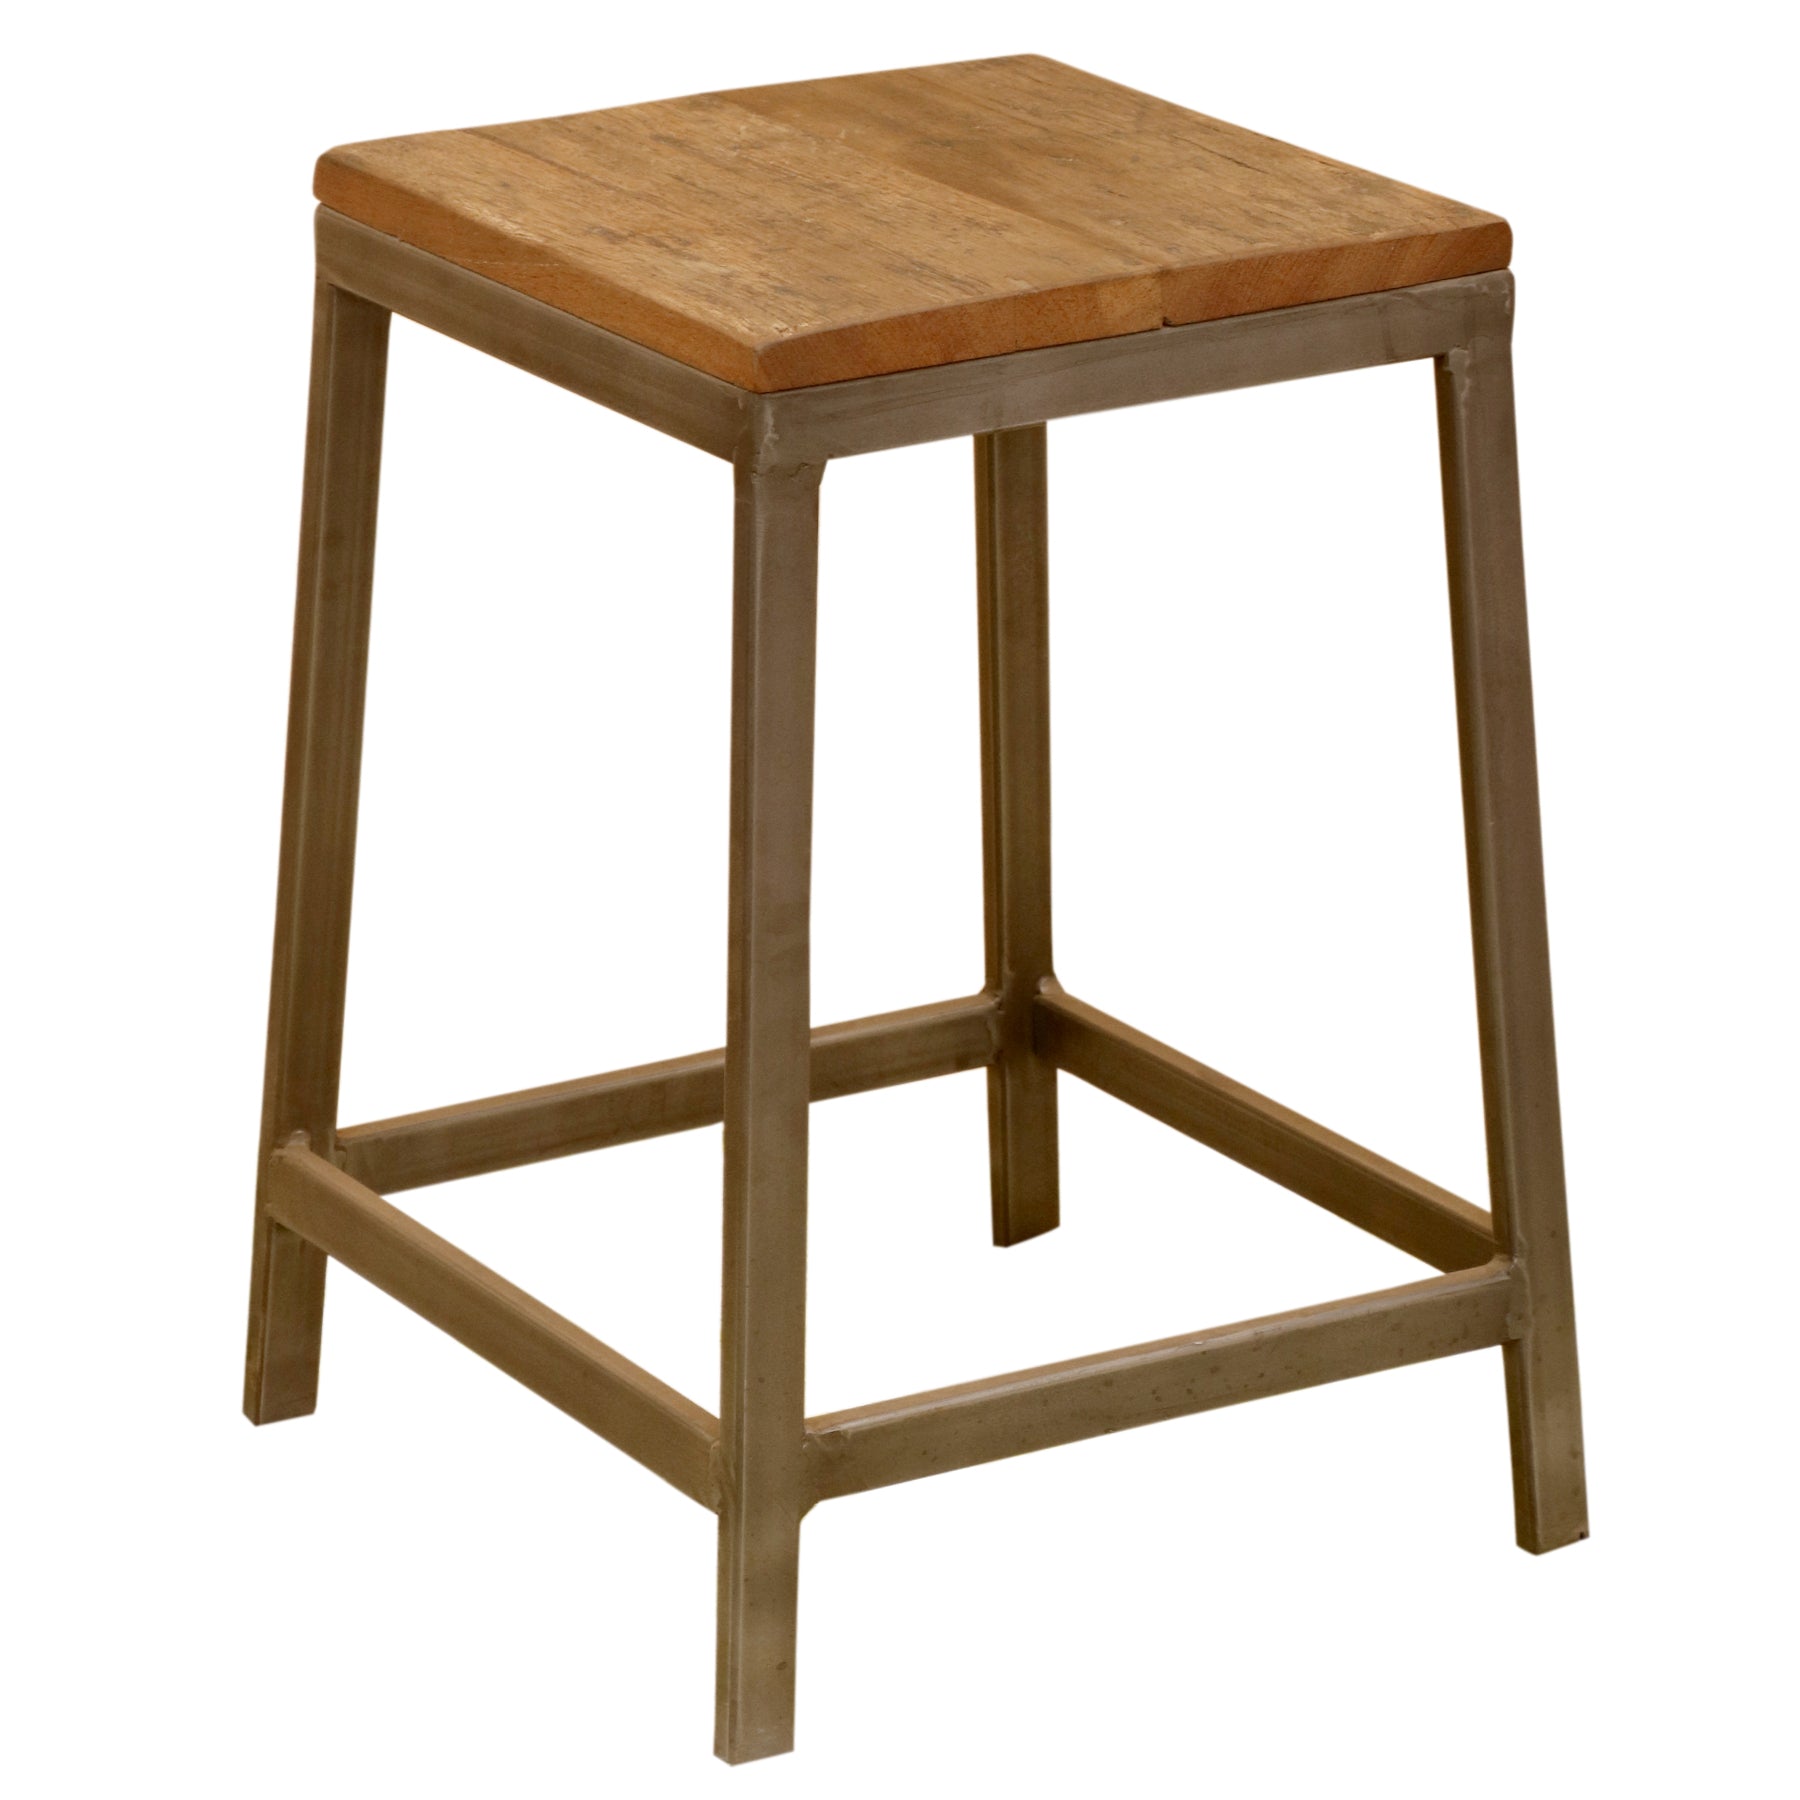 Wrought Iron and Wooden Stool Stool